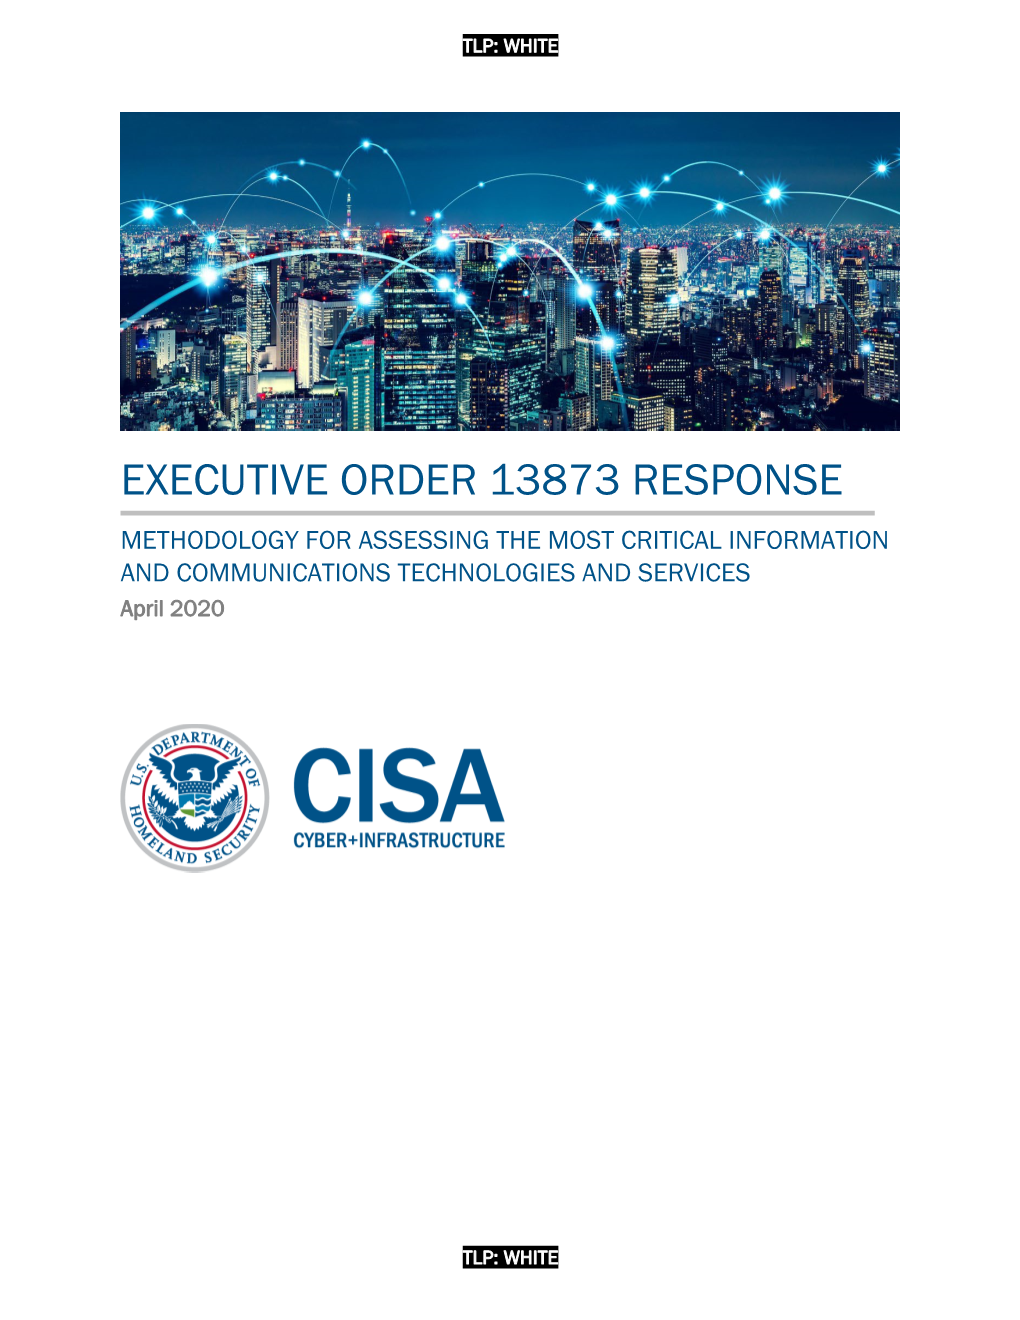 EXECUTIVE ORDER 13873 RESPONSE METHODOLOGY for ASSESSING the MOST CRITICAL INFORMATION and COMMUNICATIONS TECHNOLOGIES and SERVICES April 2020